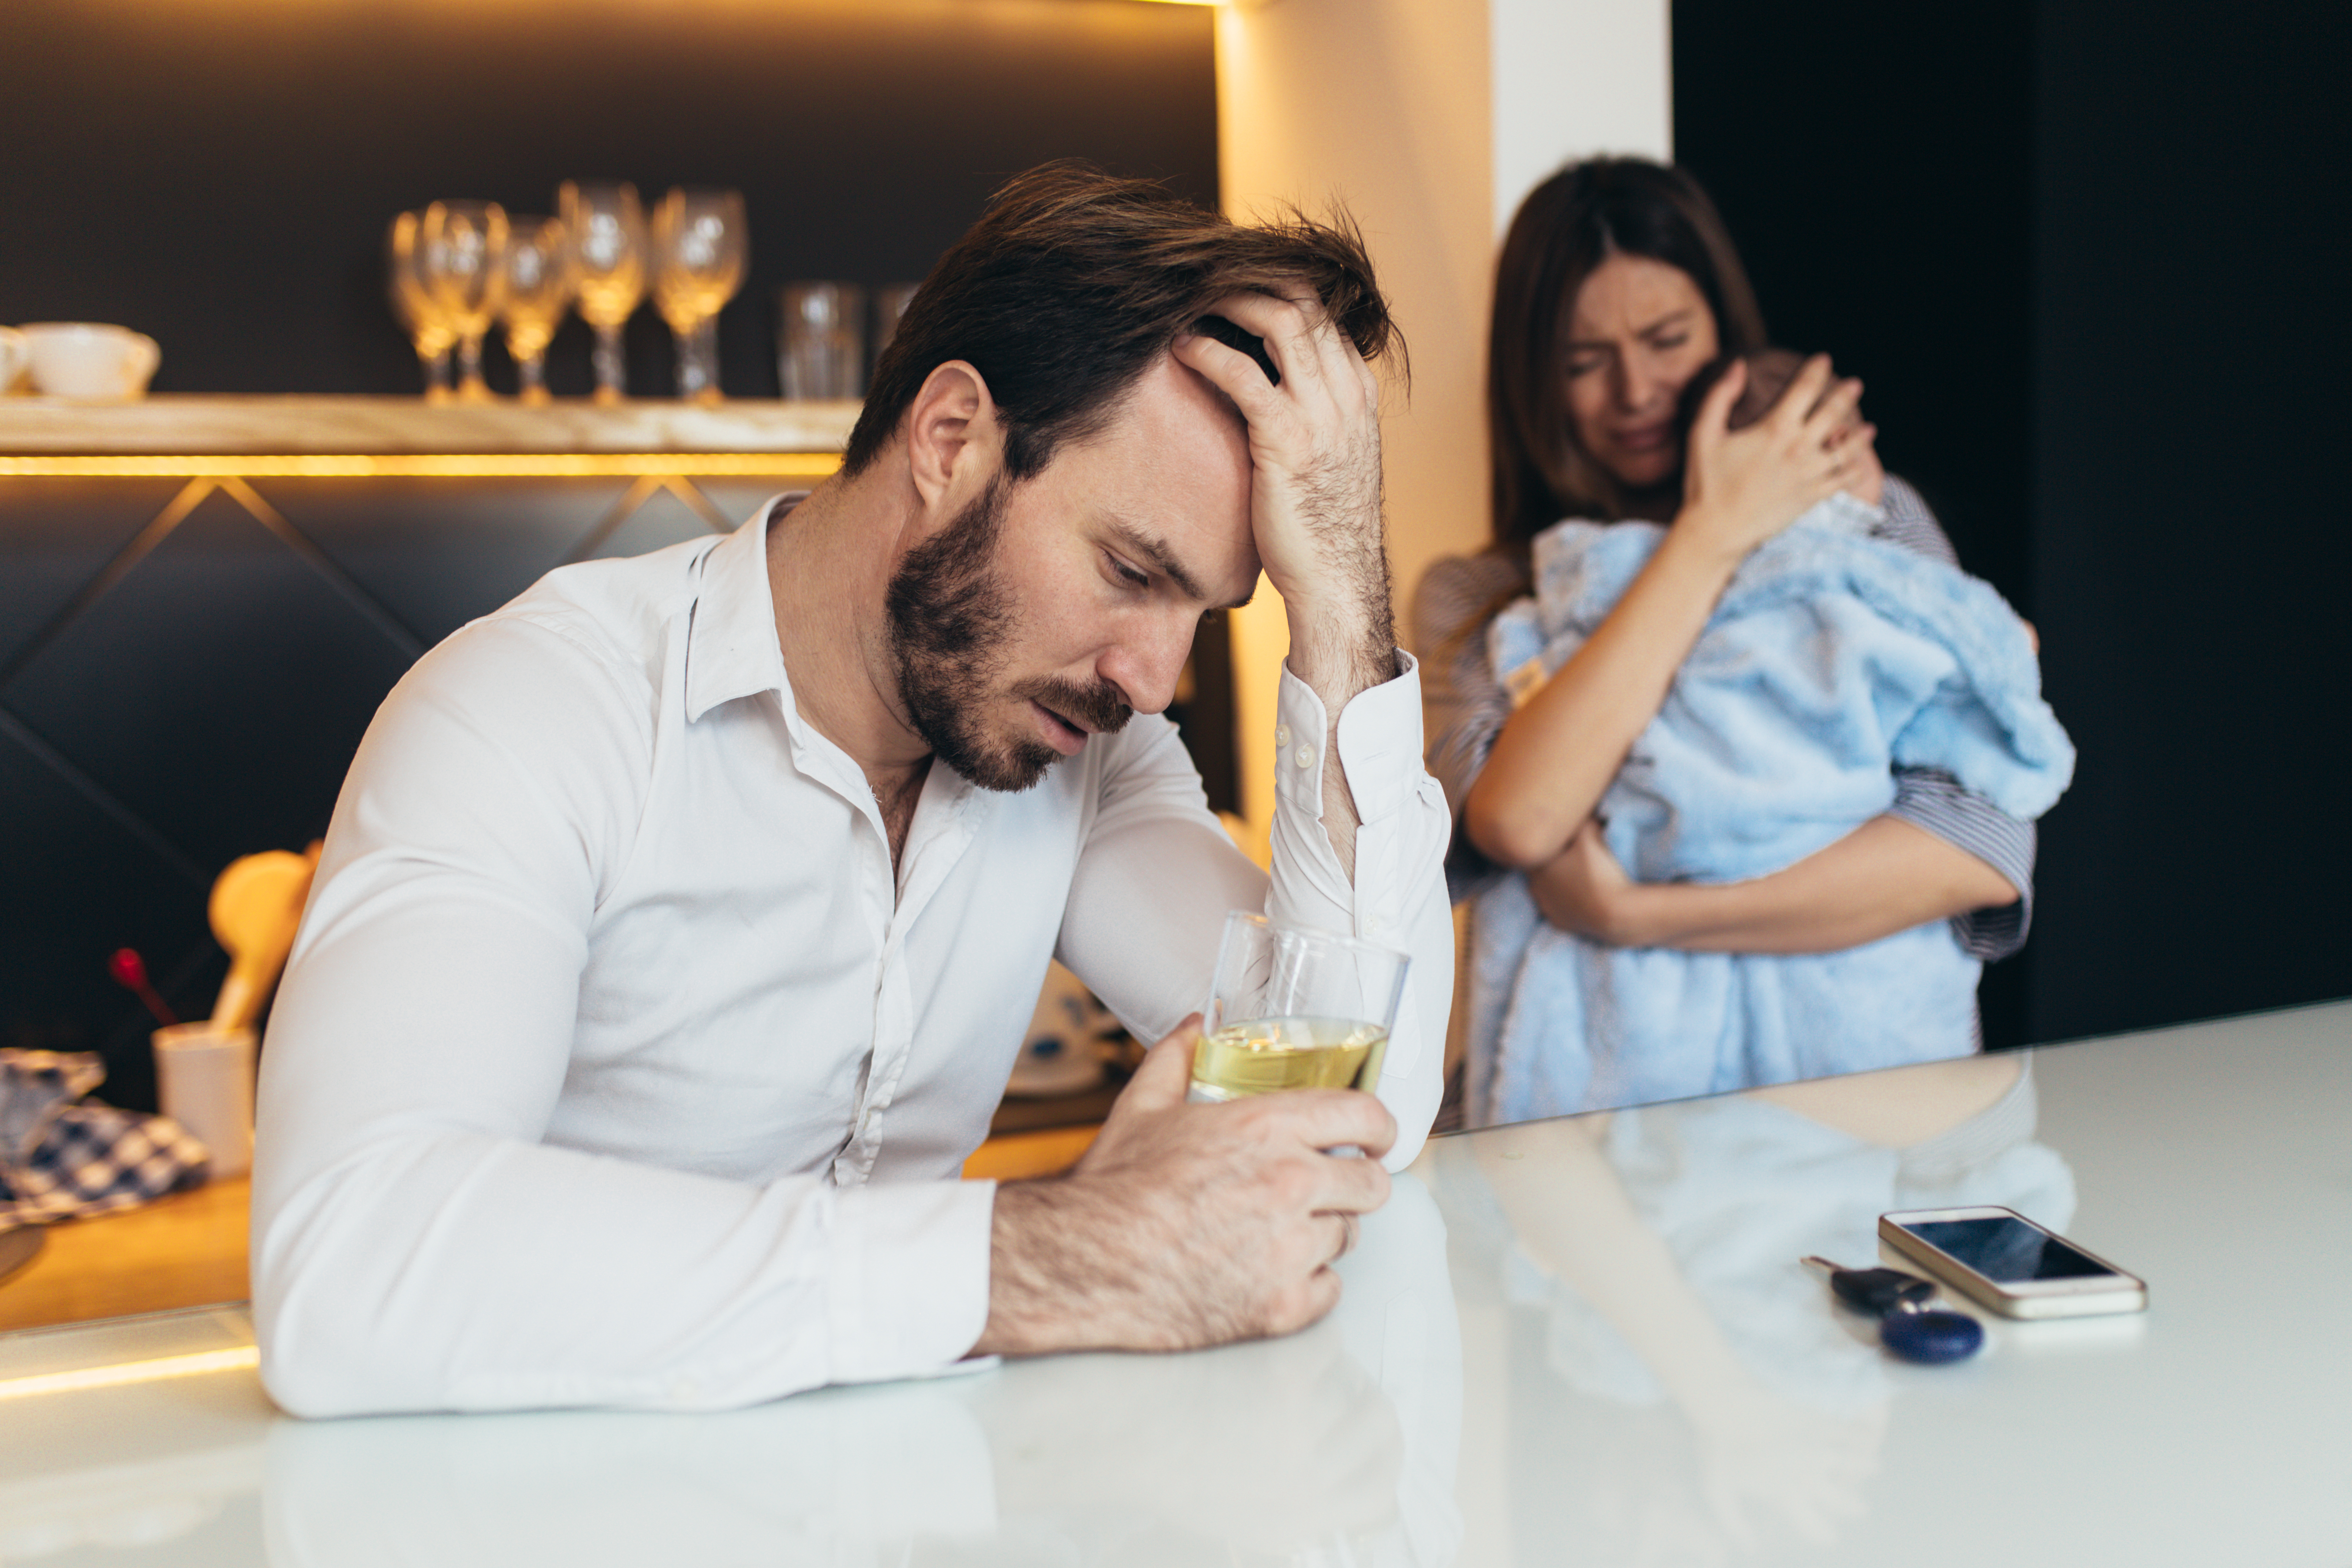 An emotional woman holding a child while standing behind a depressed man who is drinking | Source: Shutterstock